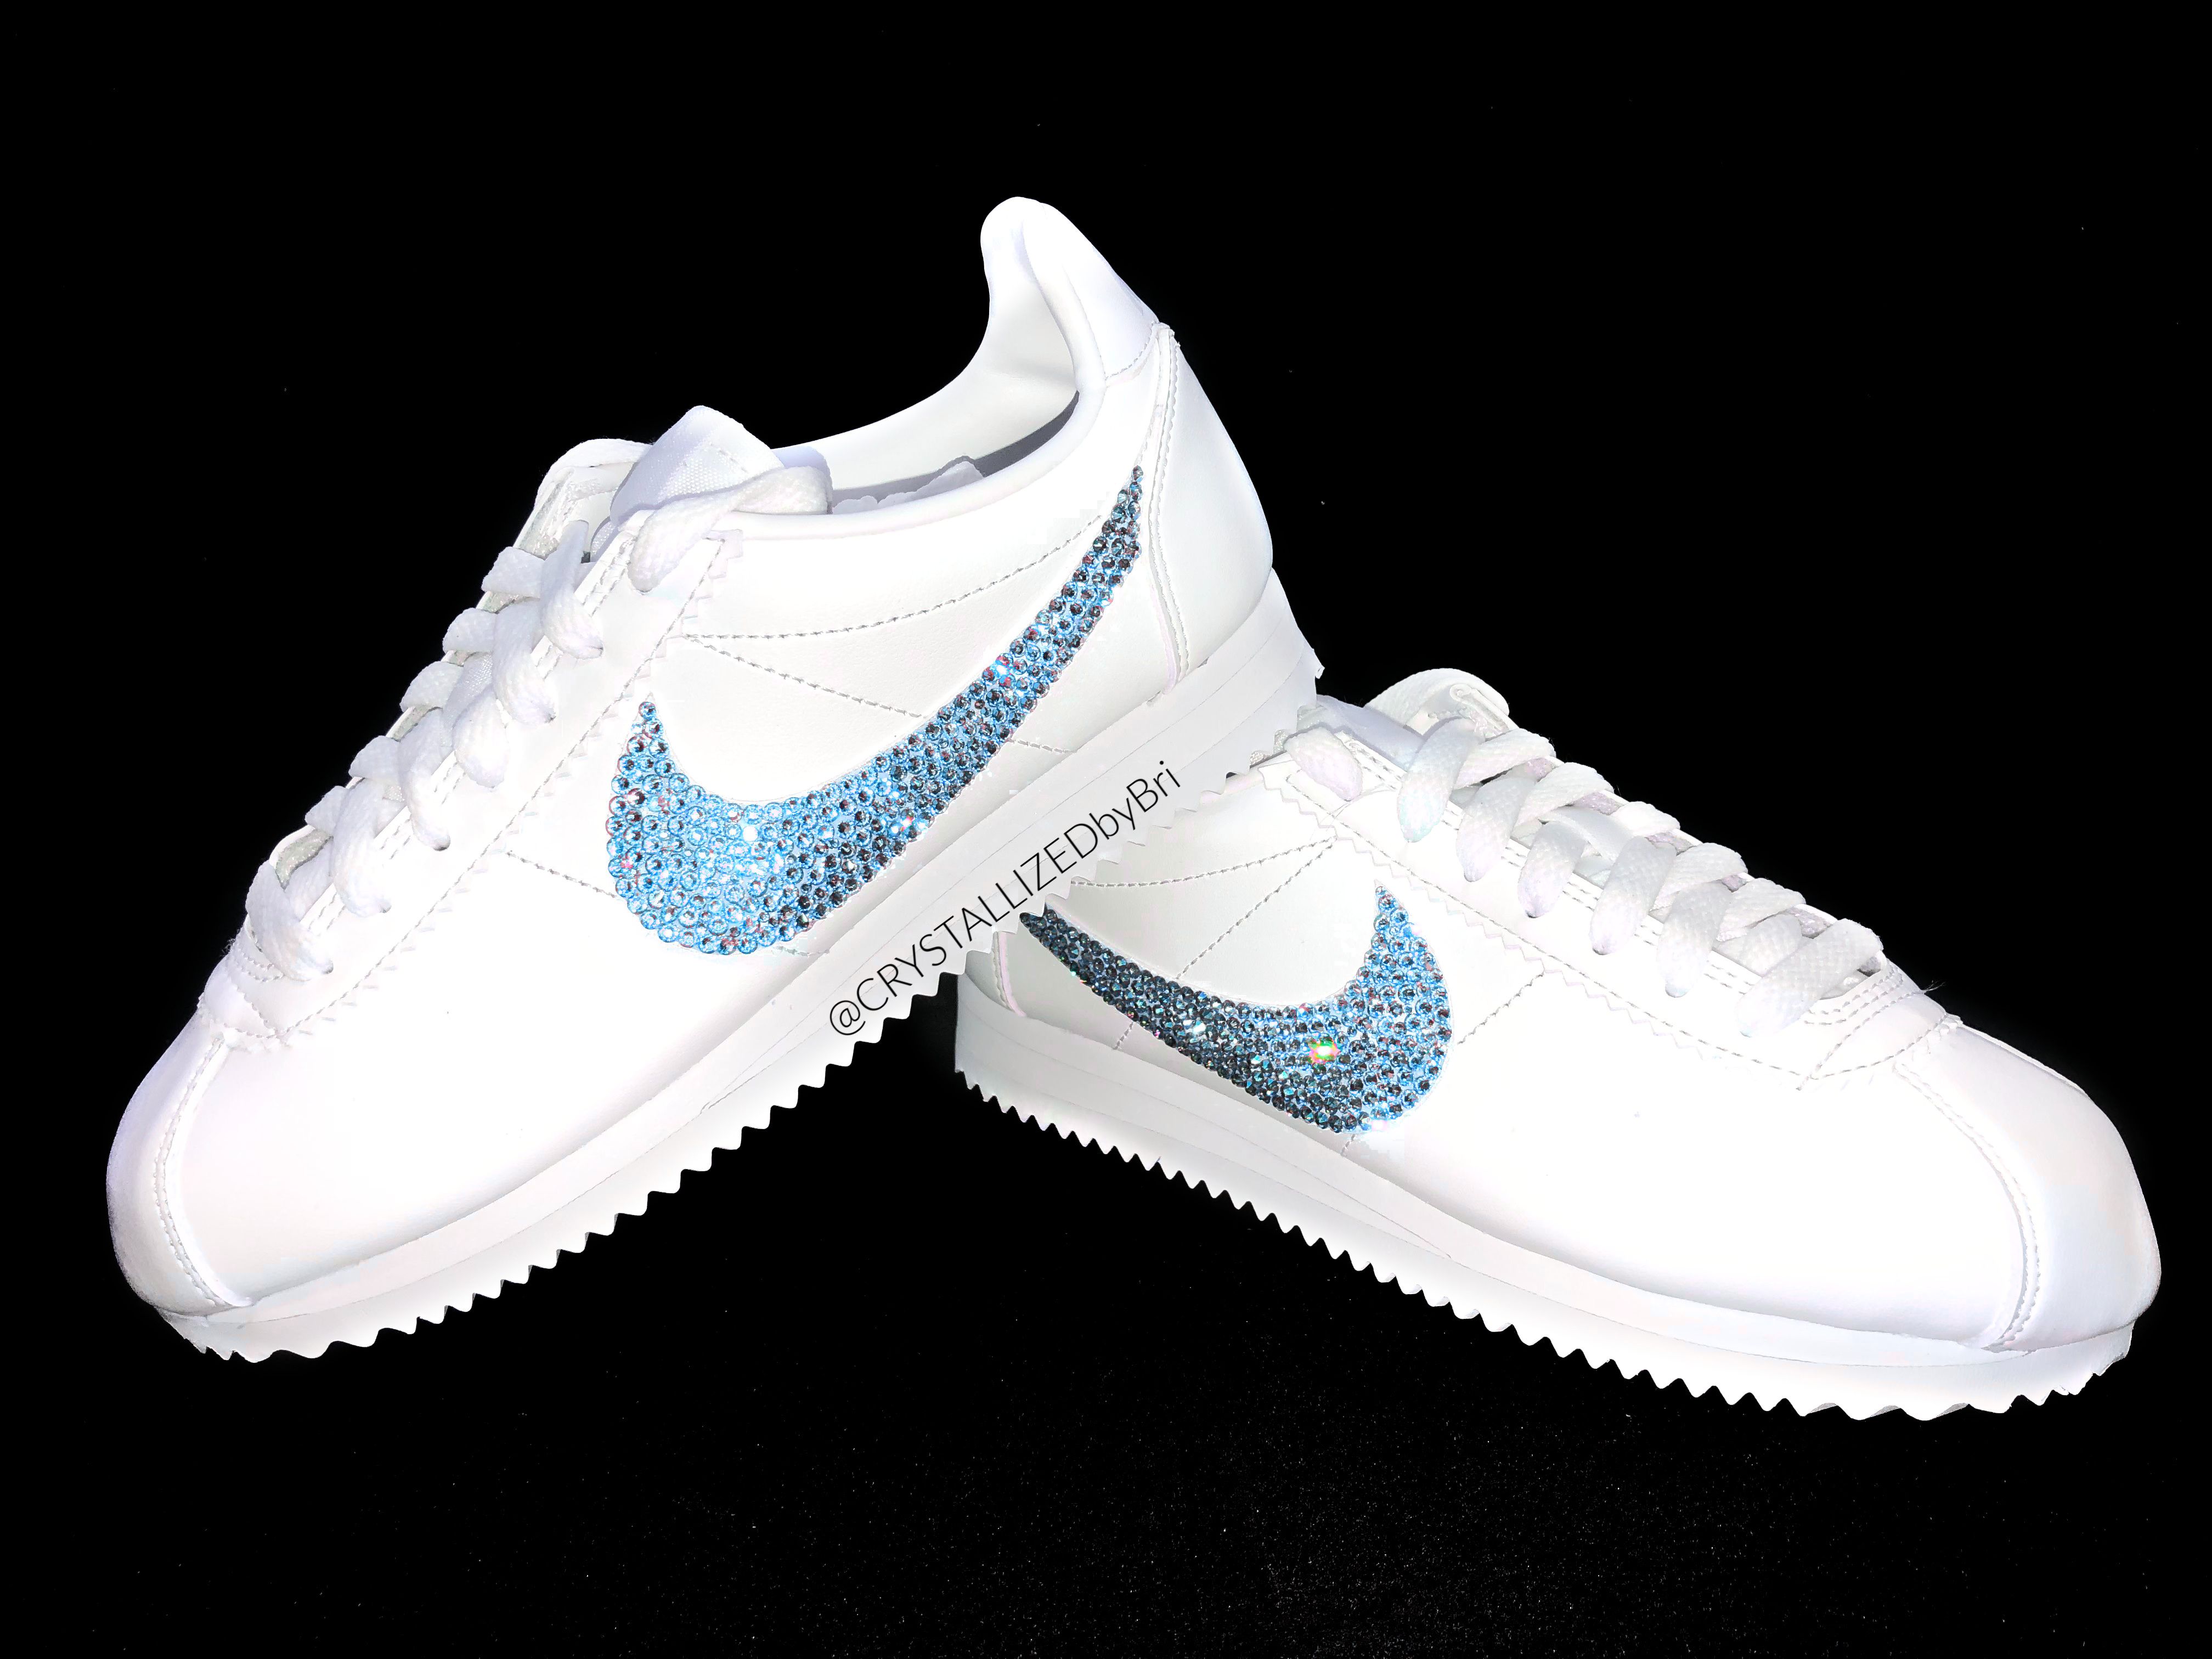 Buy Custom Nike Crystallized Classic Cortez Women's Sneakers Bling Genuine European Crystals Bedazzled White, to order from CRYSTALL!ZED by Bri, LLC | CustomMade.com